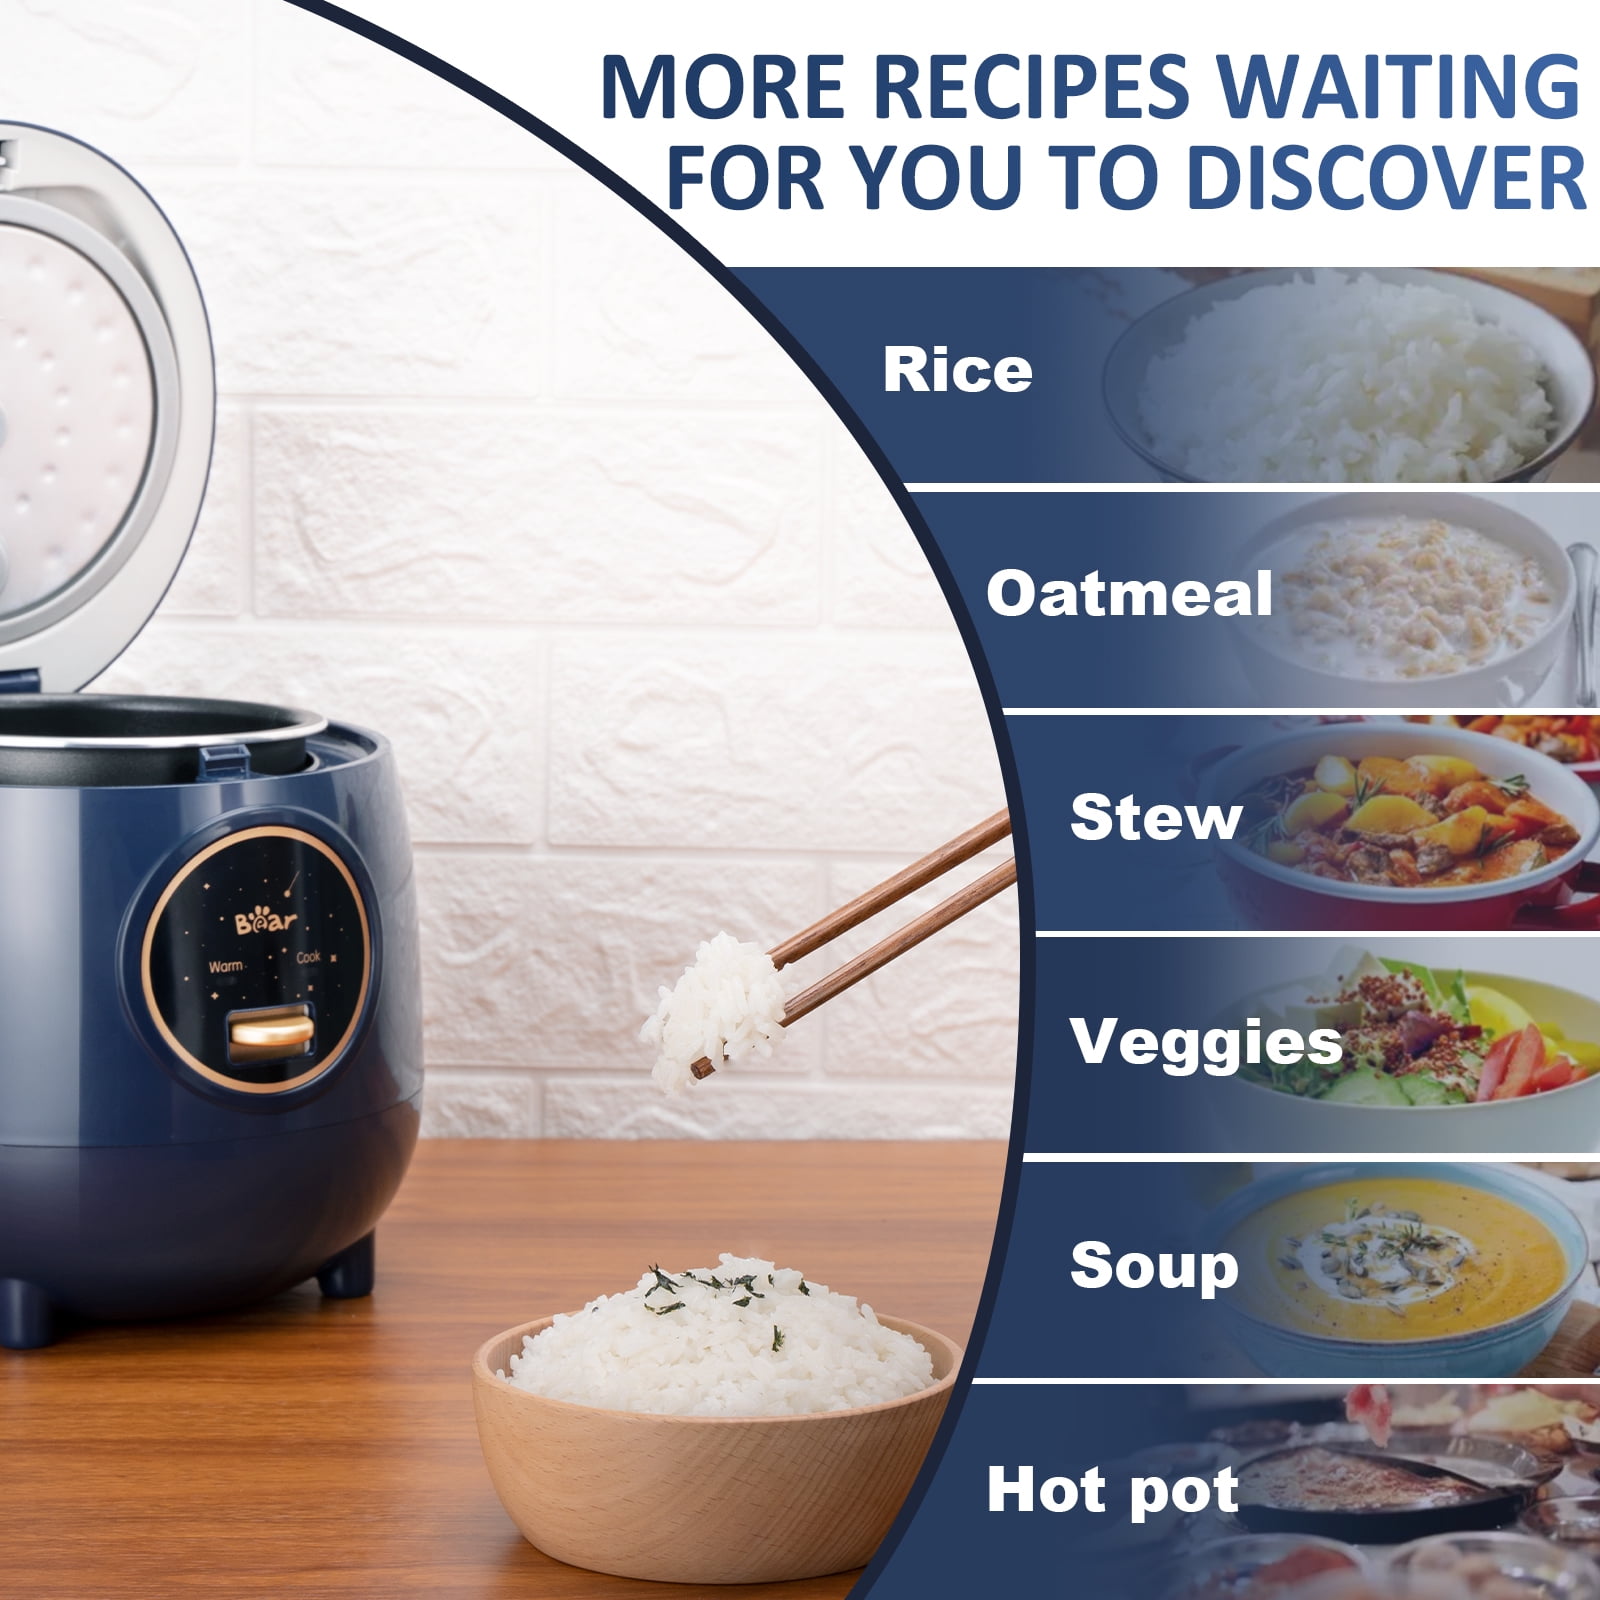  Bear Rice Cooker 3 Cups (Uncooked), Fast Electric